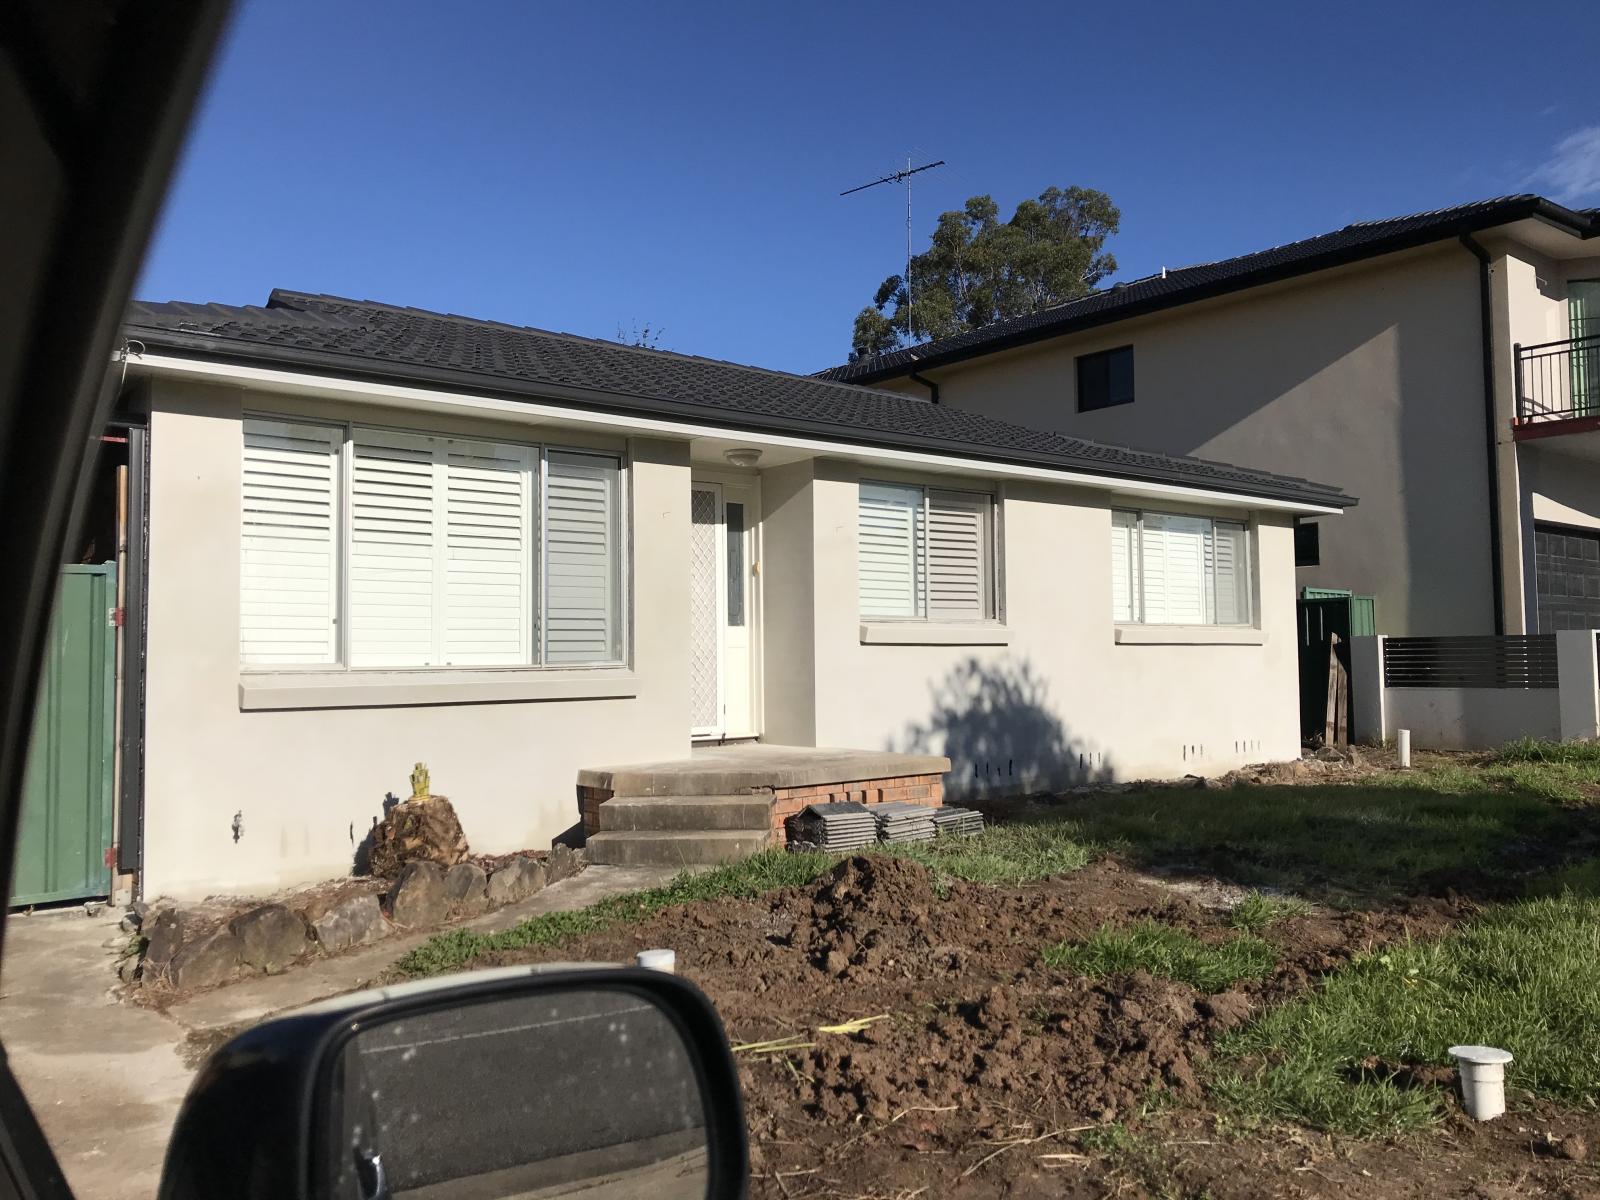 Help with exterior paint colours